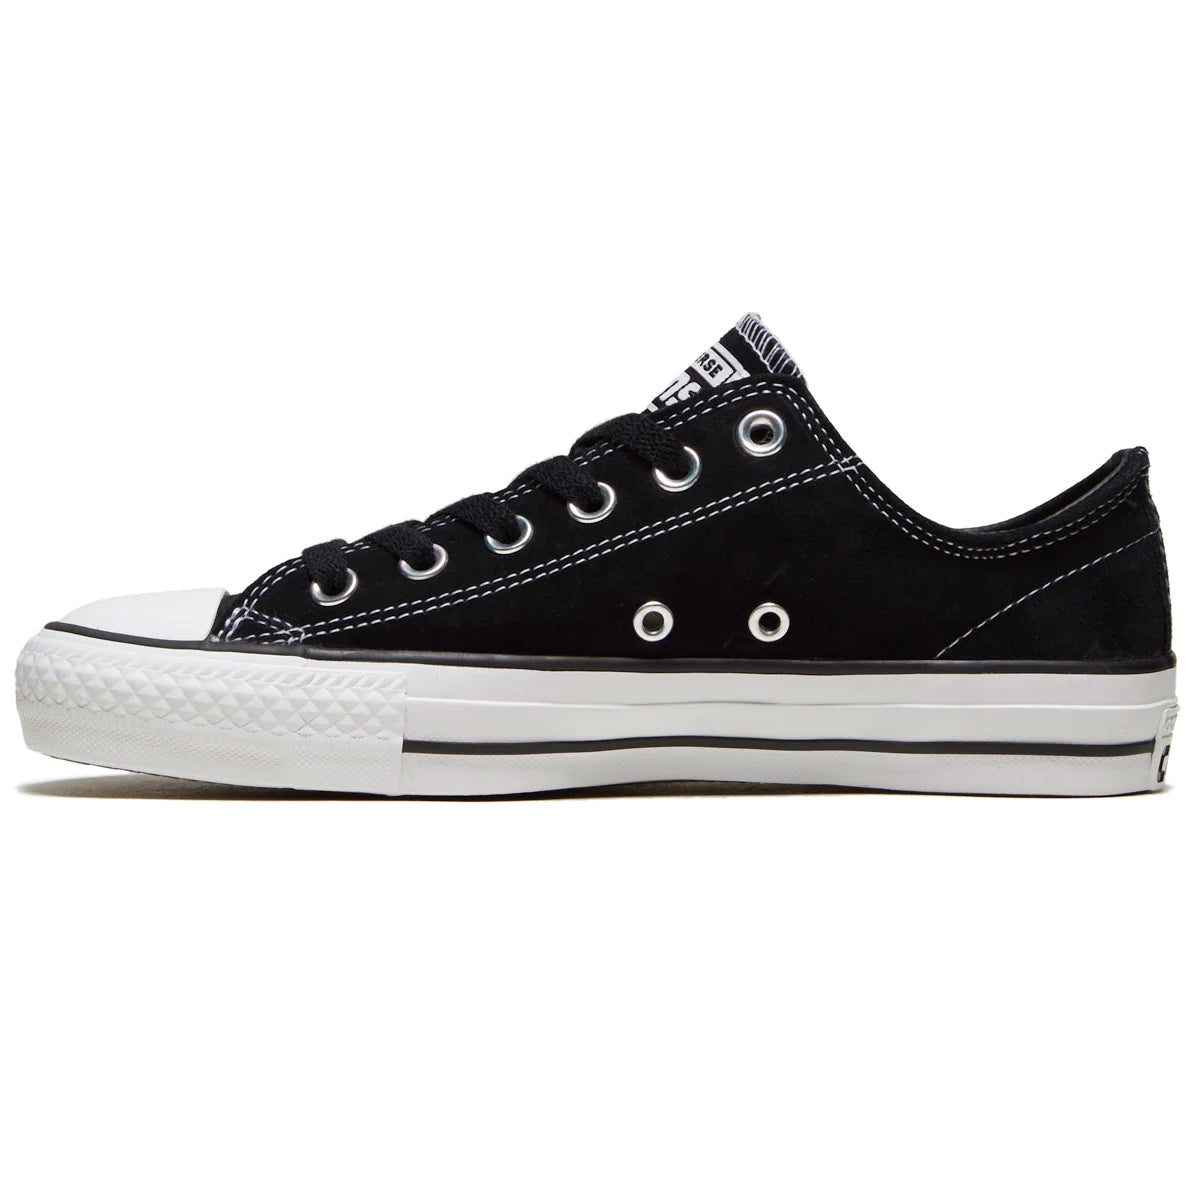 Converse Chuck Taylor All Star Pro Suede Ox Shoes